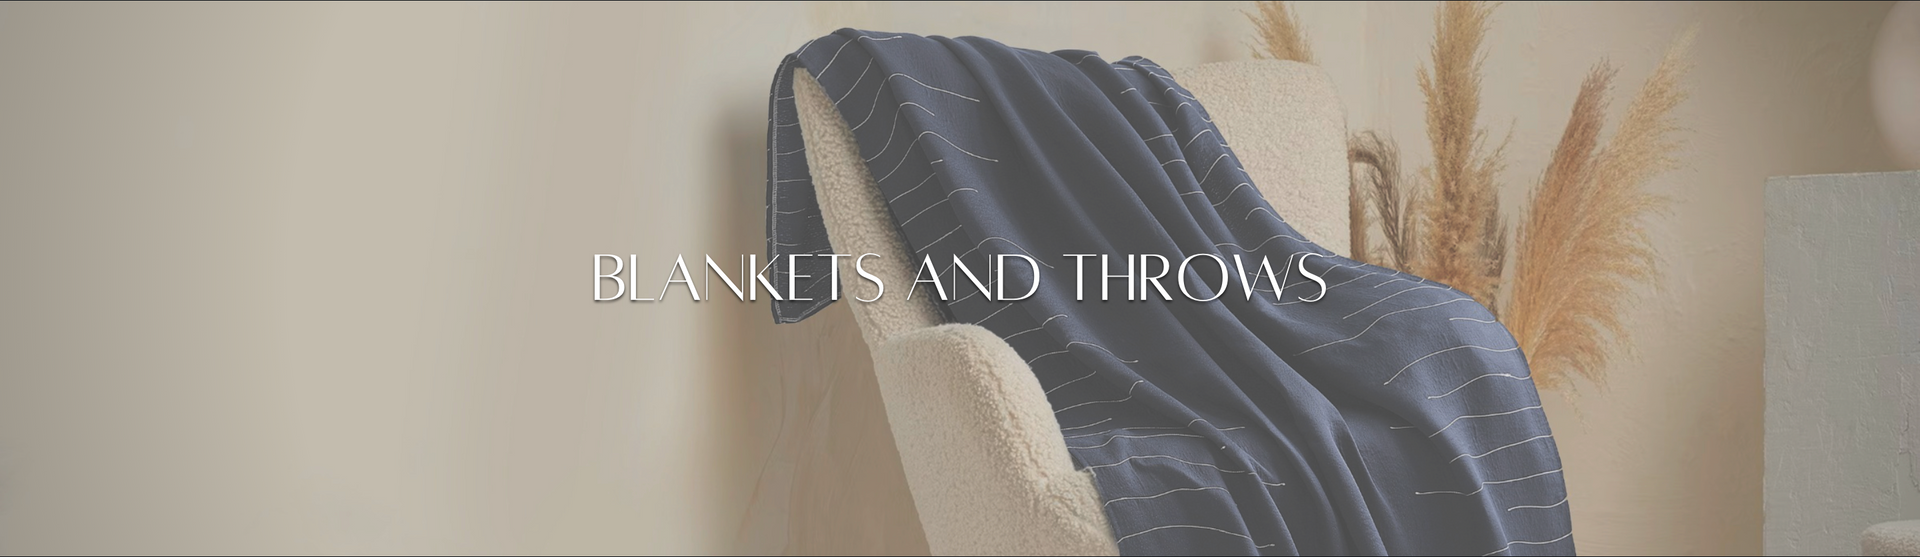 Blankets and Throws - Blankets